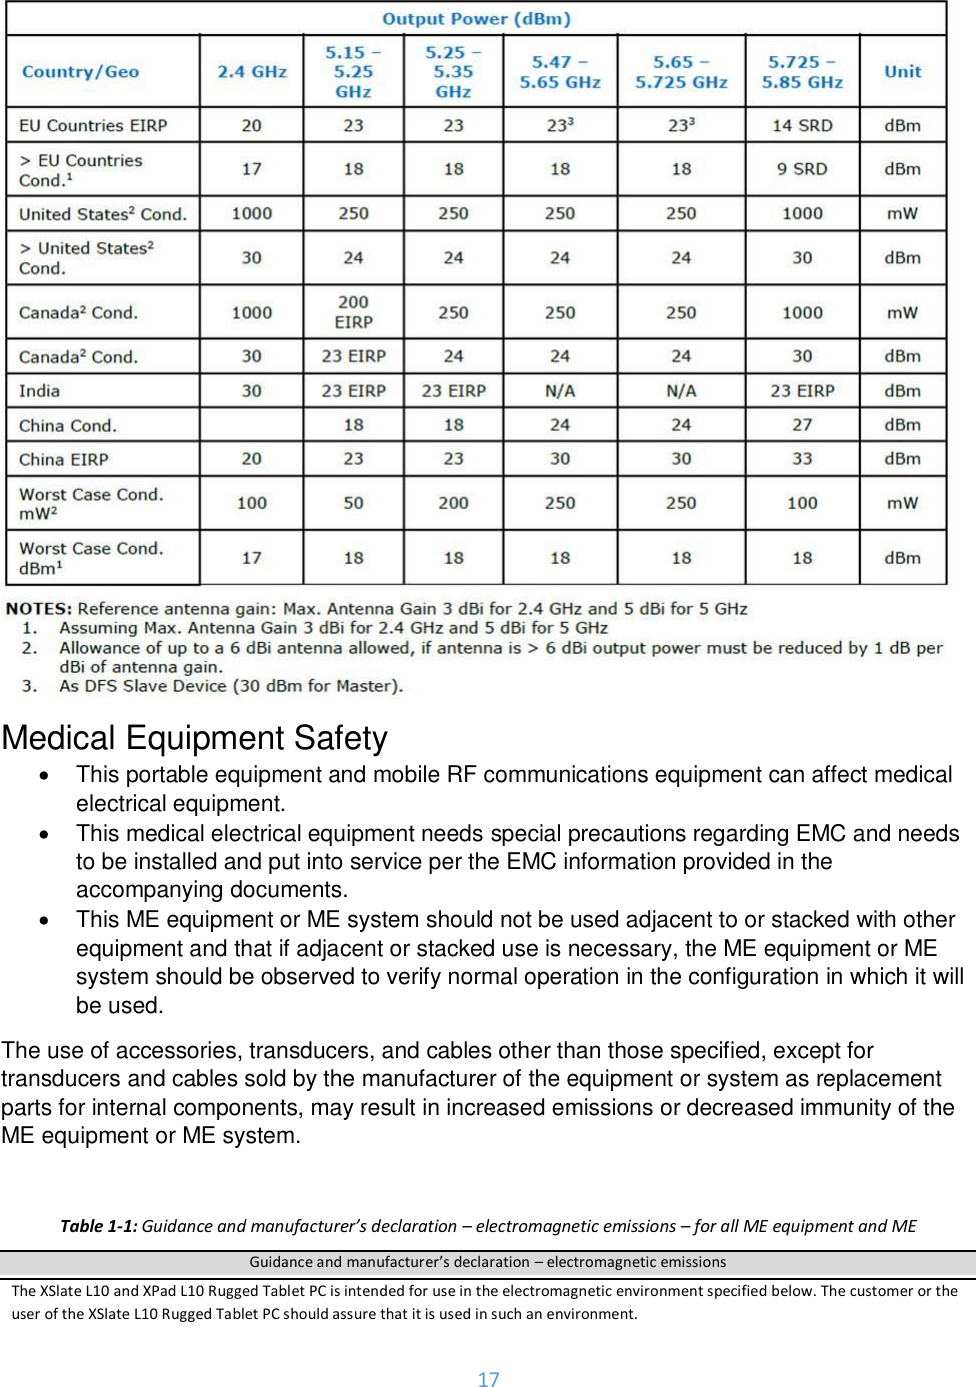 17   Medical Equipment Safety  •  This portable equipment and mobile RF communications equipment can affect medical electrical equipment.  •  This medical electrical equipment needs special precautions regarding EMC and needs to be installed and put into service per the EMC information provided in the accompanying documents. •  This ME equipment or ME system should not be used adjacent to or stacked with other equipment and that if adjacent or stacked use is necessary, the ME equipment or ME system should be observed to verify normal operation in the configuration in which it will be used. The use of accessories, transducers, and cables other than those specified, except for transducers and cables sold by the manufacturer of the equipment or system as replacement parts for internal components, may result in increased emissions or decreased immunity of the ME equipment or ME system.  Table 1-1: Guidance and manufacturer’s declaration – electromagnetic emissions – for all ME equipment and ME Guidance and manufacturer’s declaration – electromagnetic emissions  The XSlate L10 and XPad L10 Rugged Tablet PC is intended for use in the electromagnetic environment specified below. The customer or the user of the XSlate L10 Rugged Tablet PC should assure that it is used in such an environment.  